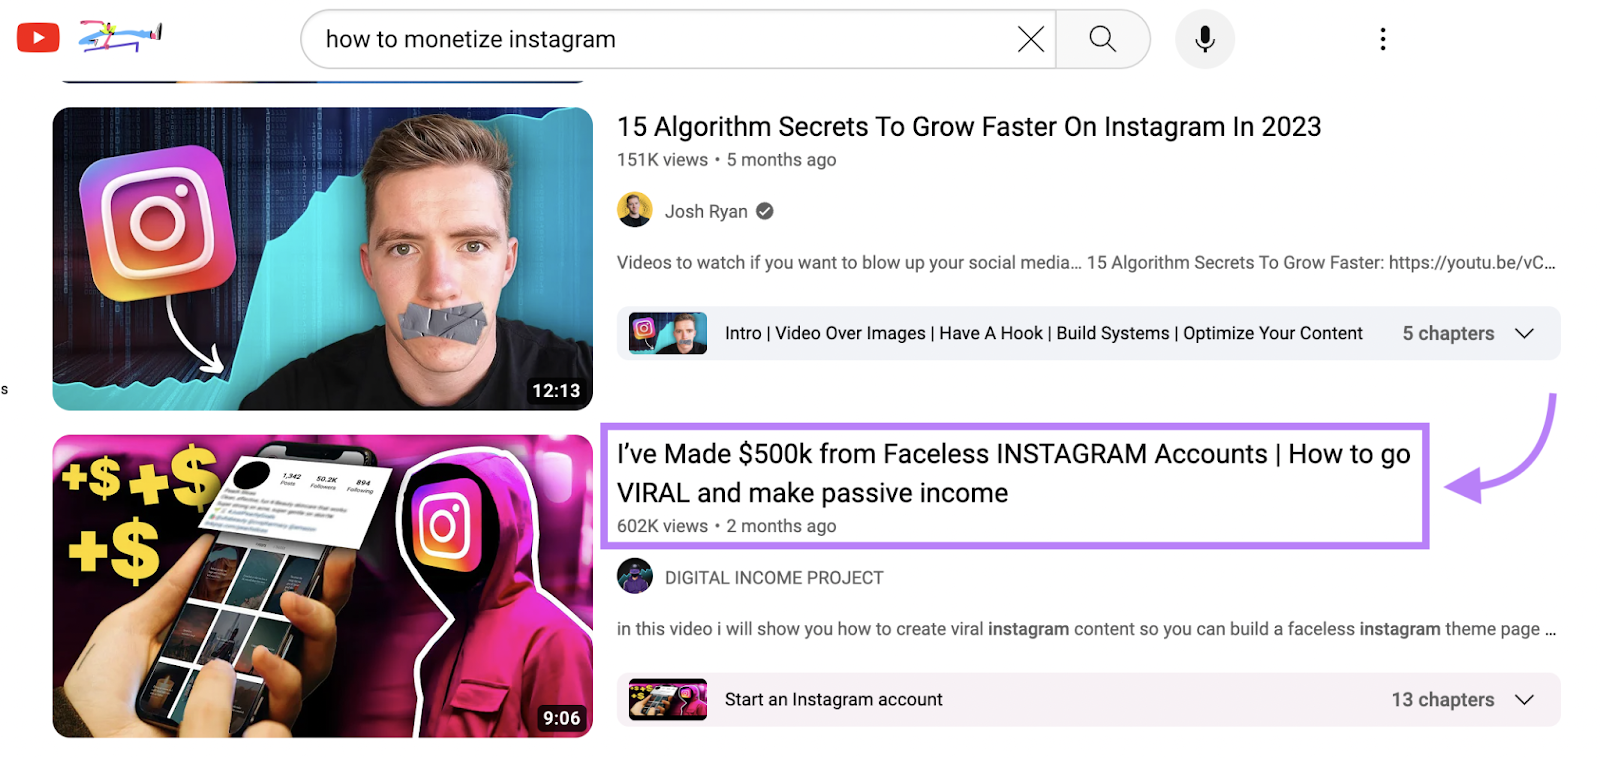 YouTube video titled "“I’ve Made $500k from Faceless INSTAGRAM Accounts | How to go VIRAL and make passive income”